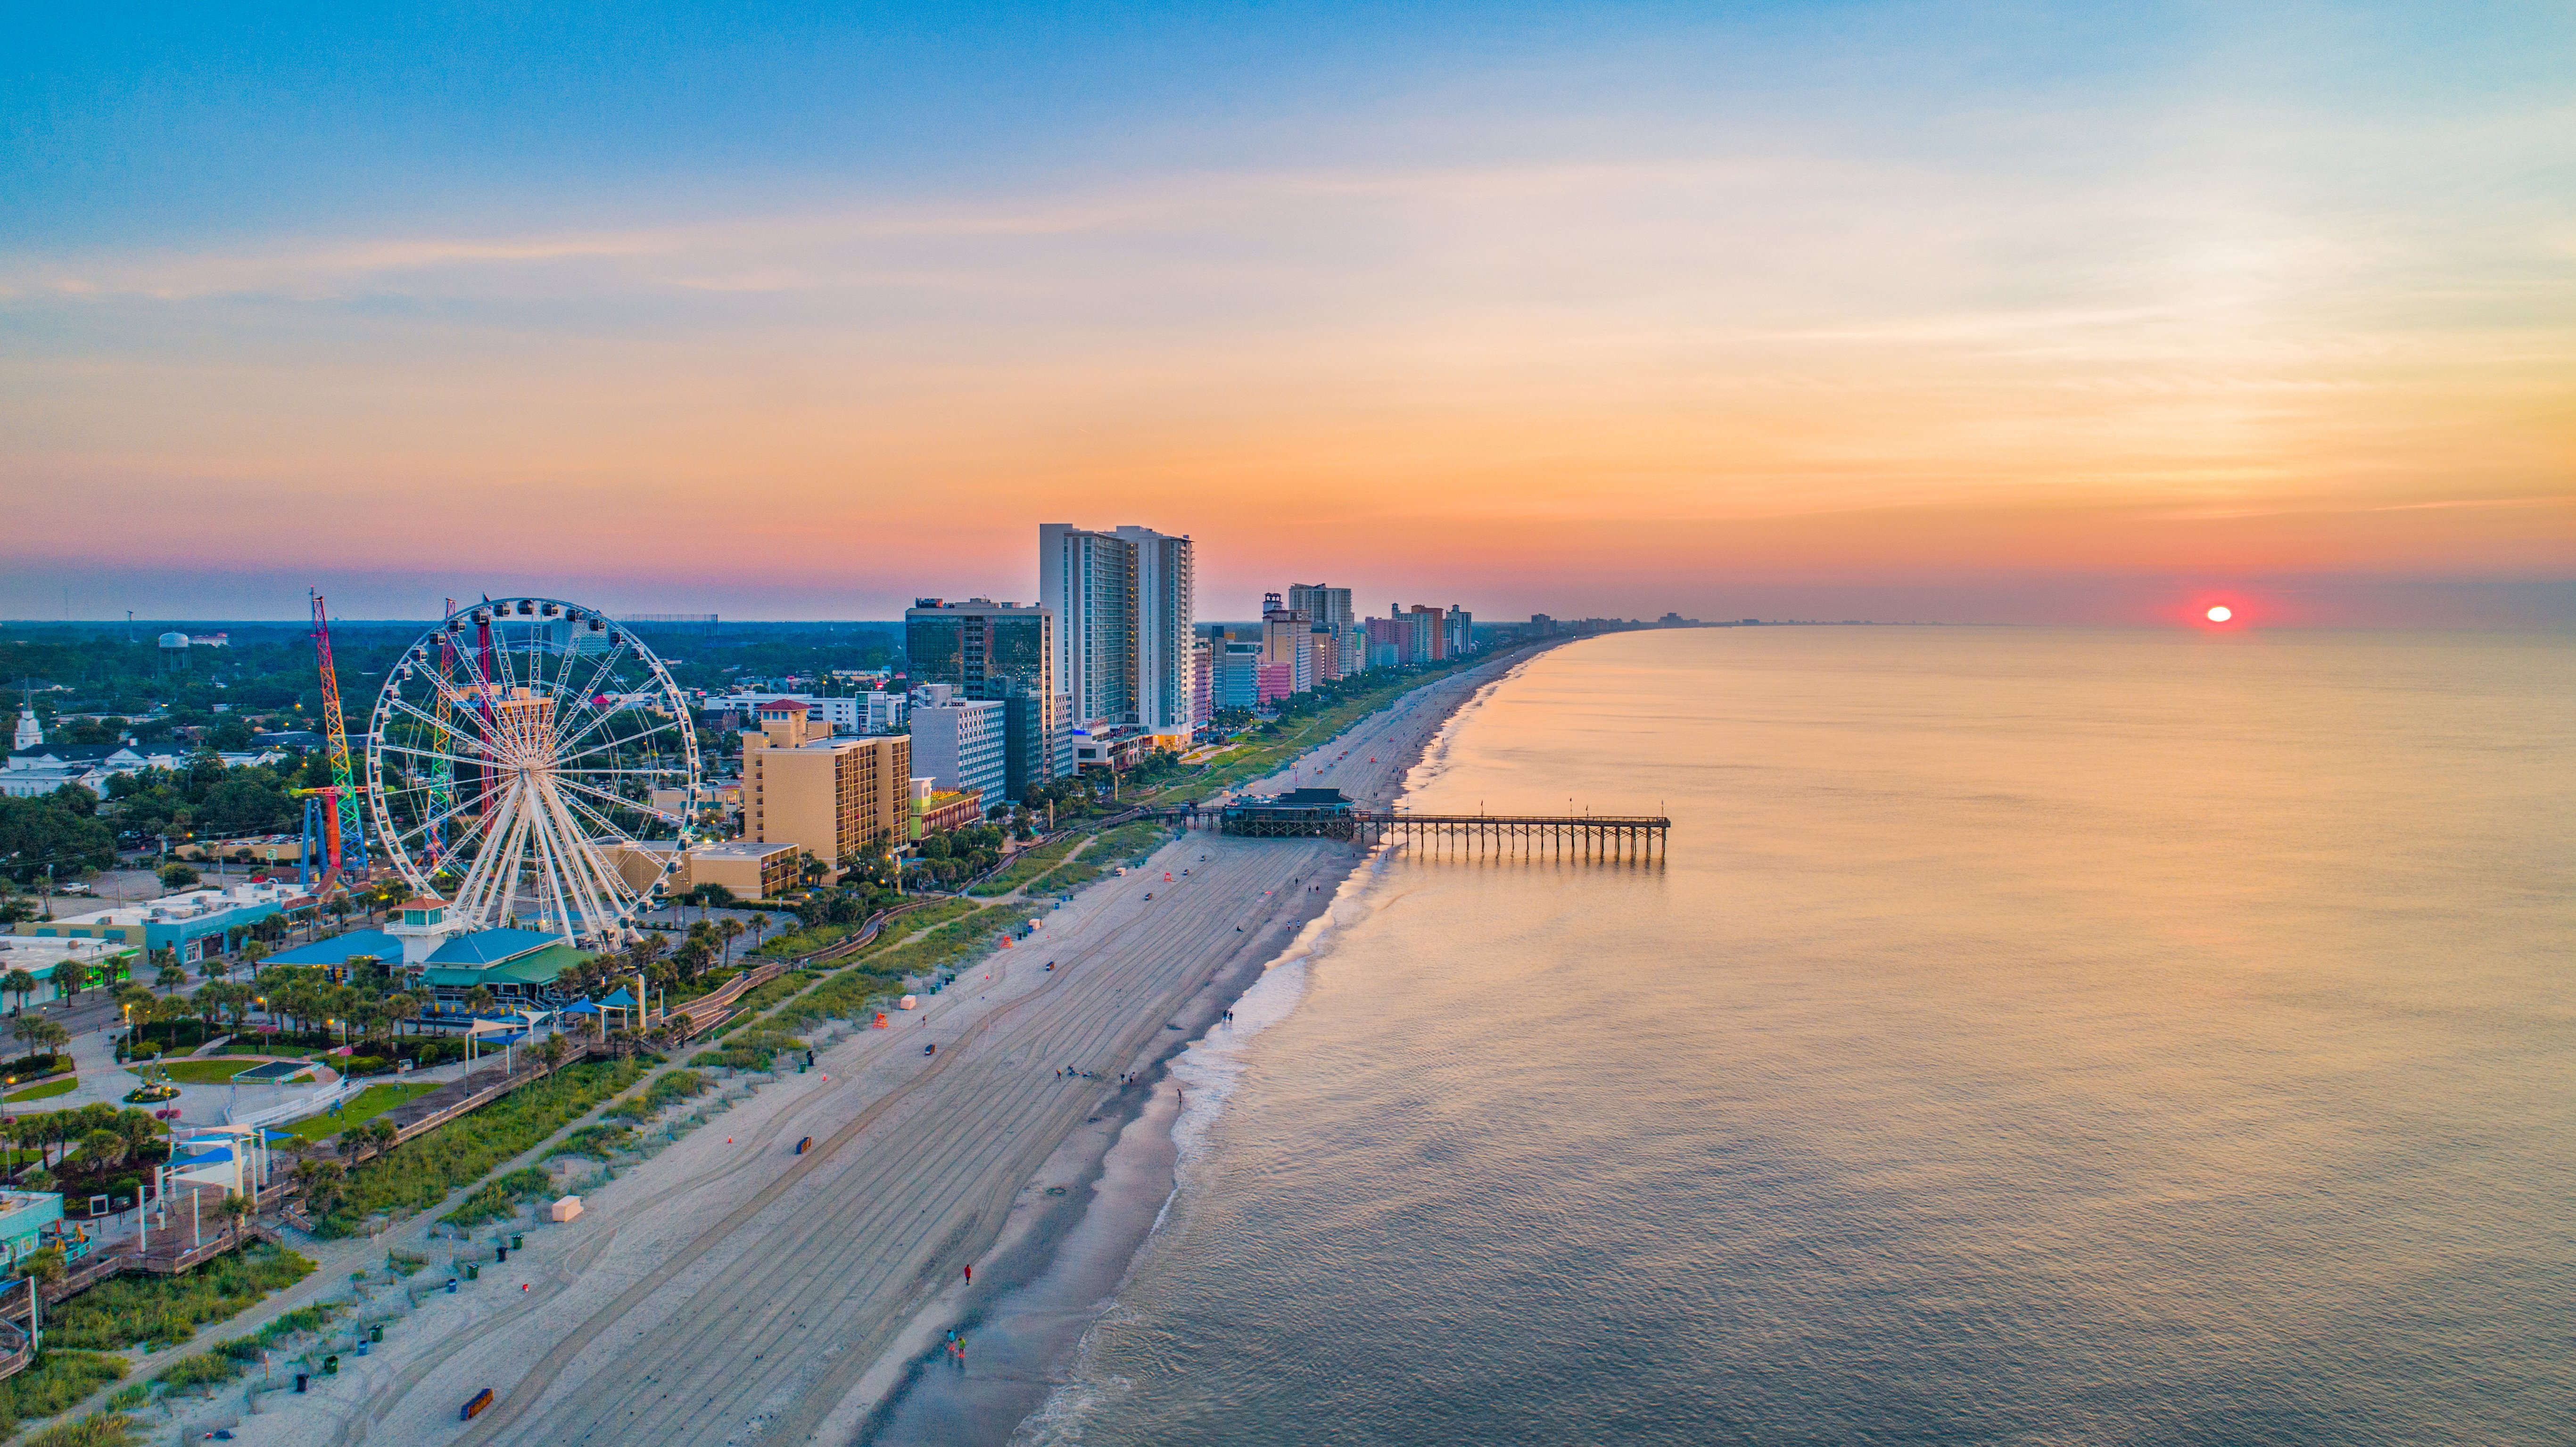 Myrtle Beach: the fastest-growing metro area 10/2019 to 10/2020